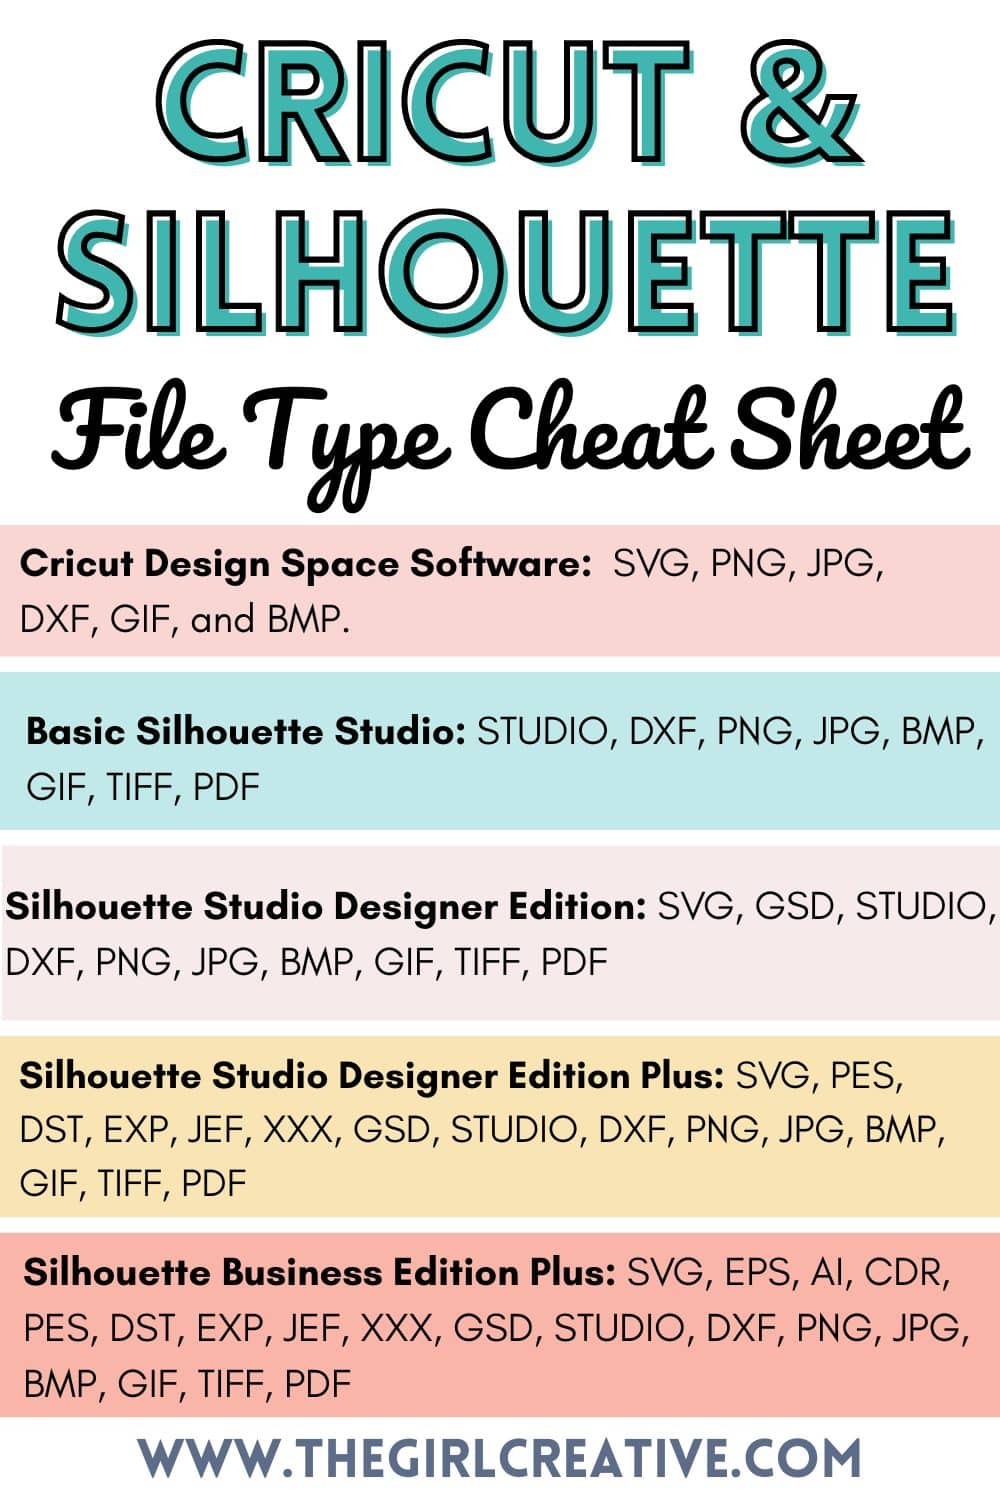 Cricut and Silhouette File Type Cheat Sheet